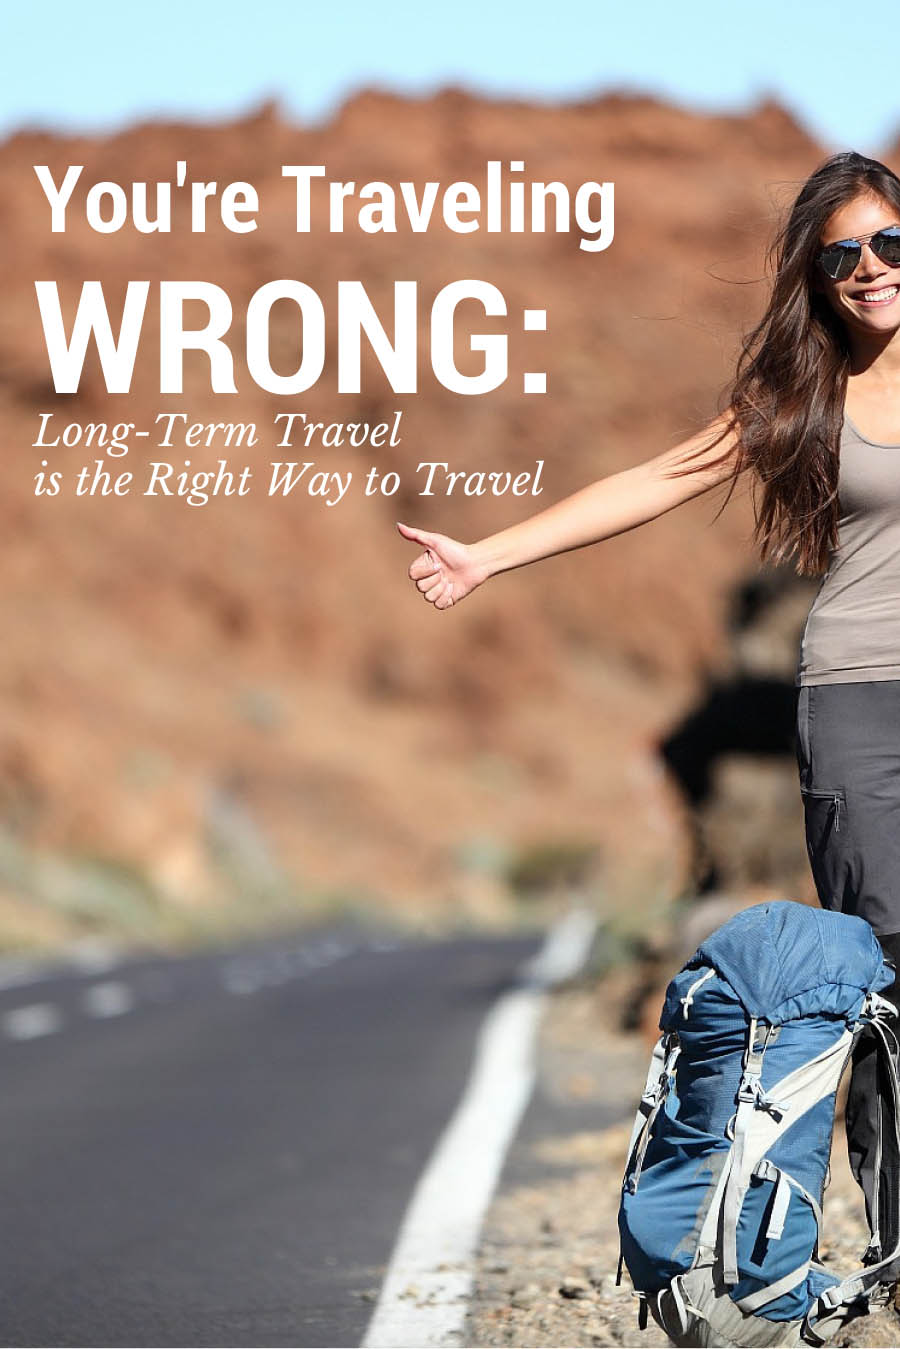 You're Traveling Wrong: Long-Term Travel is the Right Way to Travel